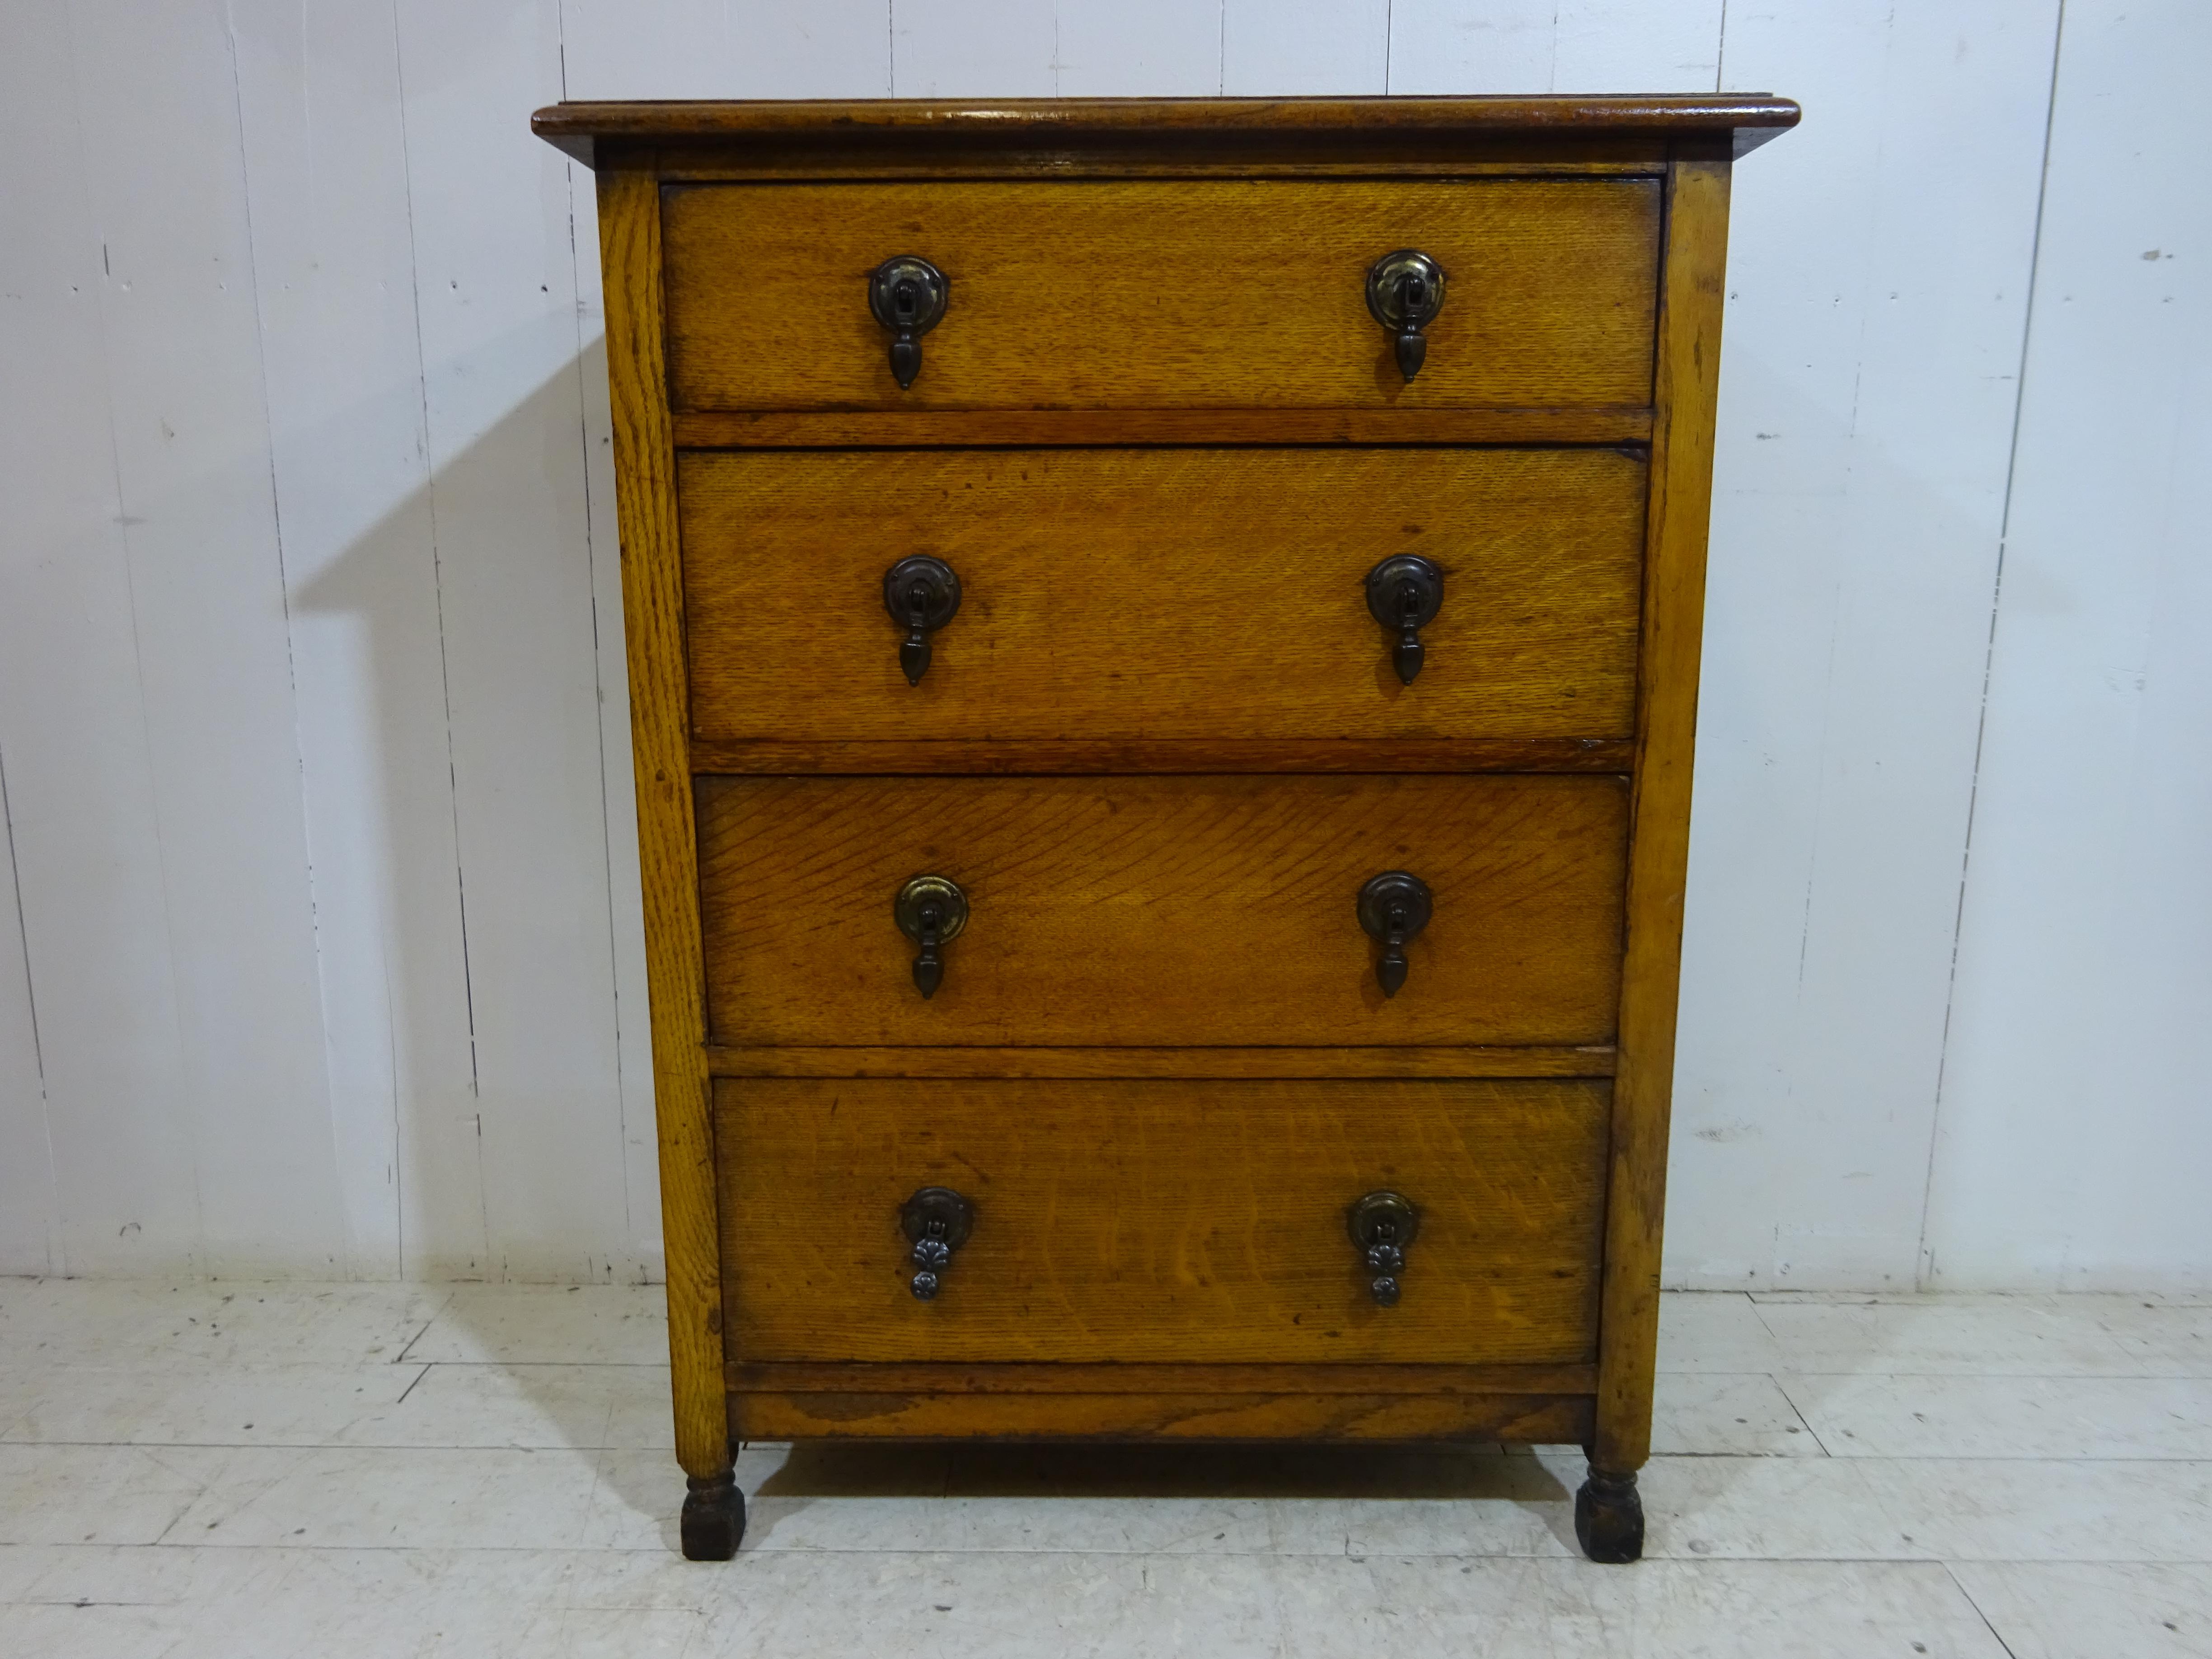 1930s chest of drawers

A lovely example of this elegant art deco chest of drawers. 

Fresh to the market this piece has been in the same family from new. Crafted in solid oak the chest of drawers has great proportions making it ideal for the